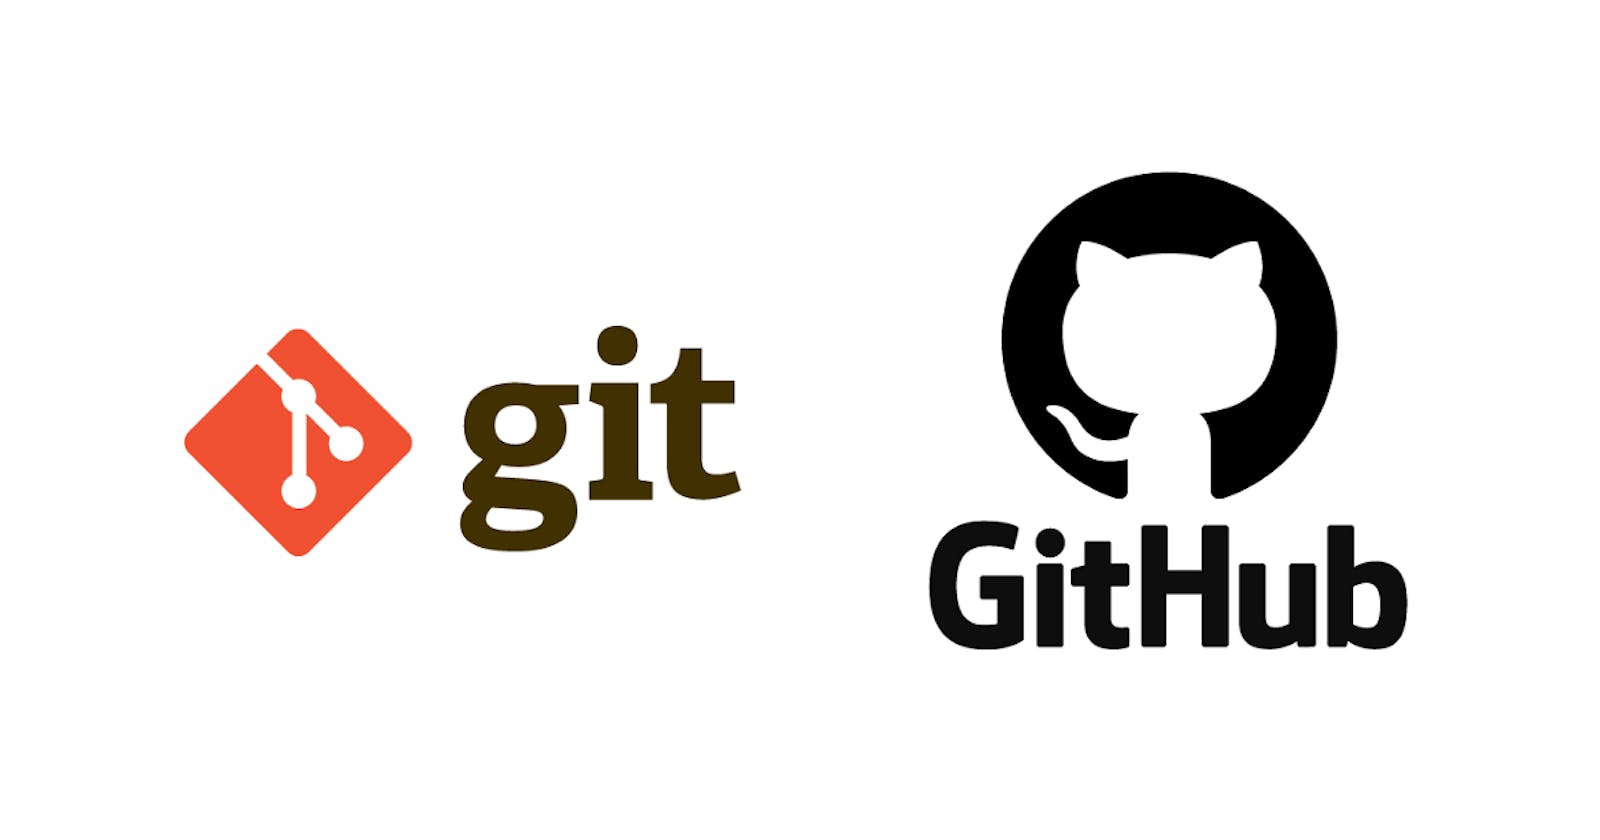 How to get started with Git and GitHub